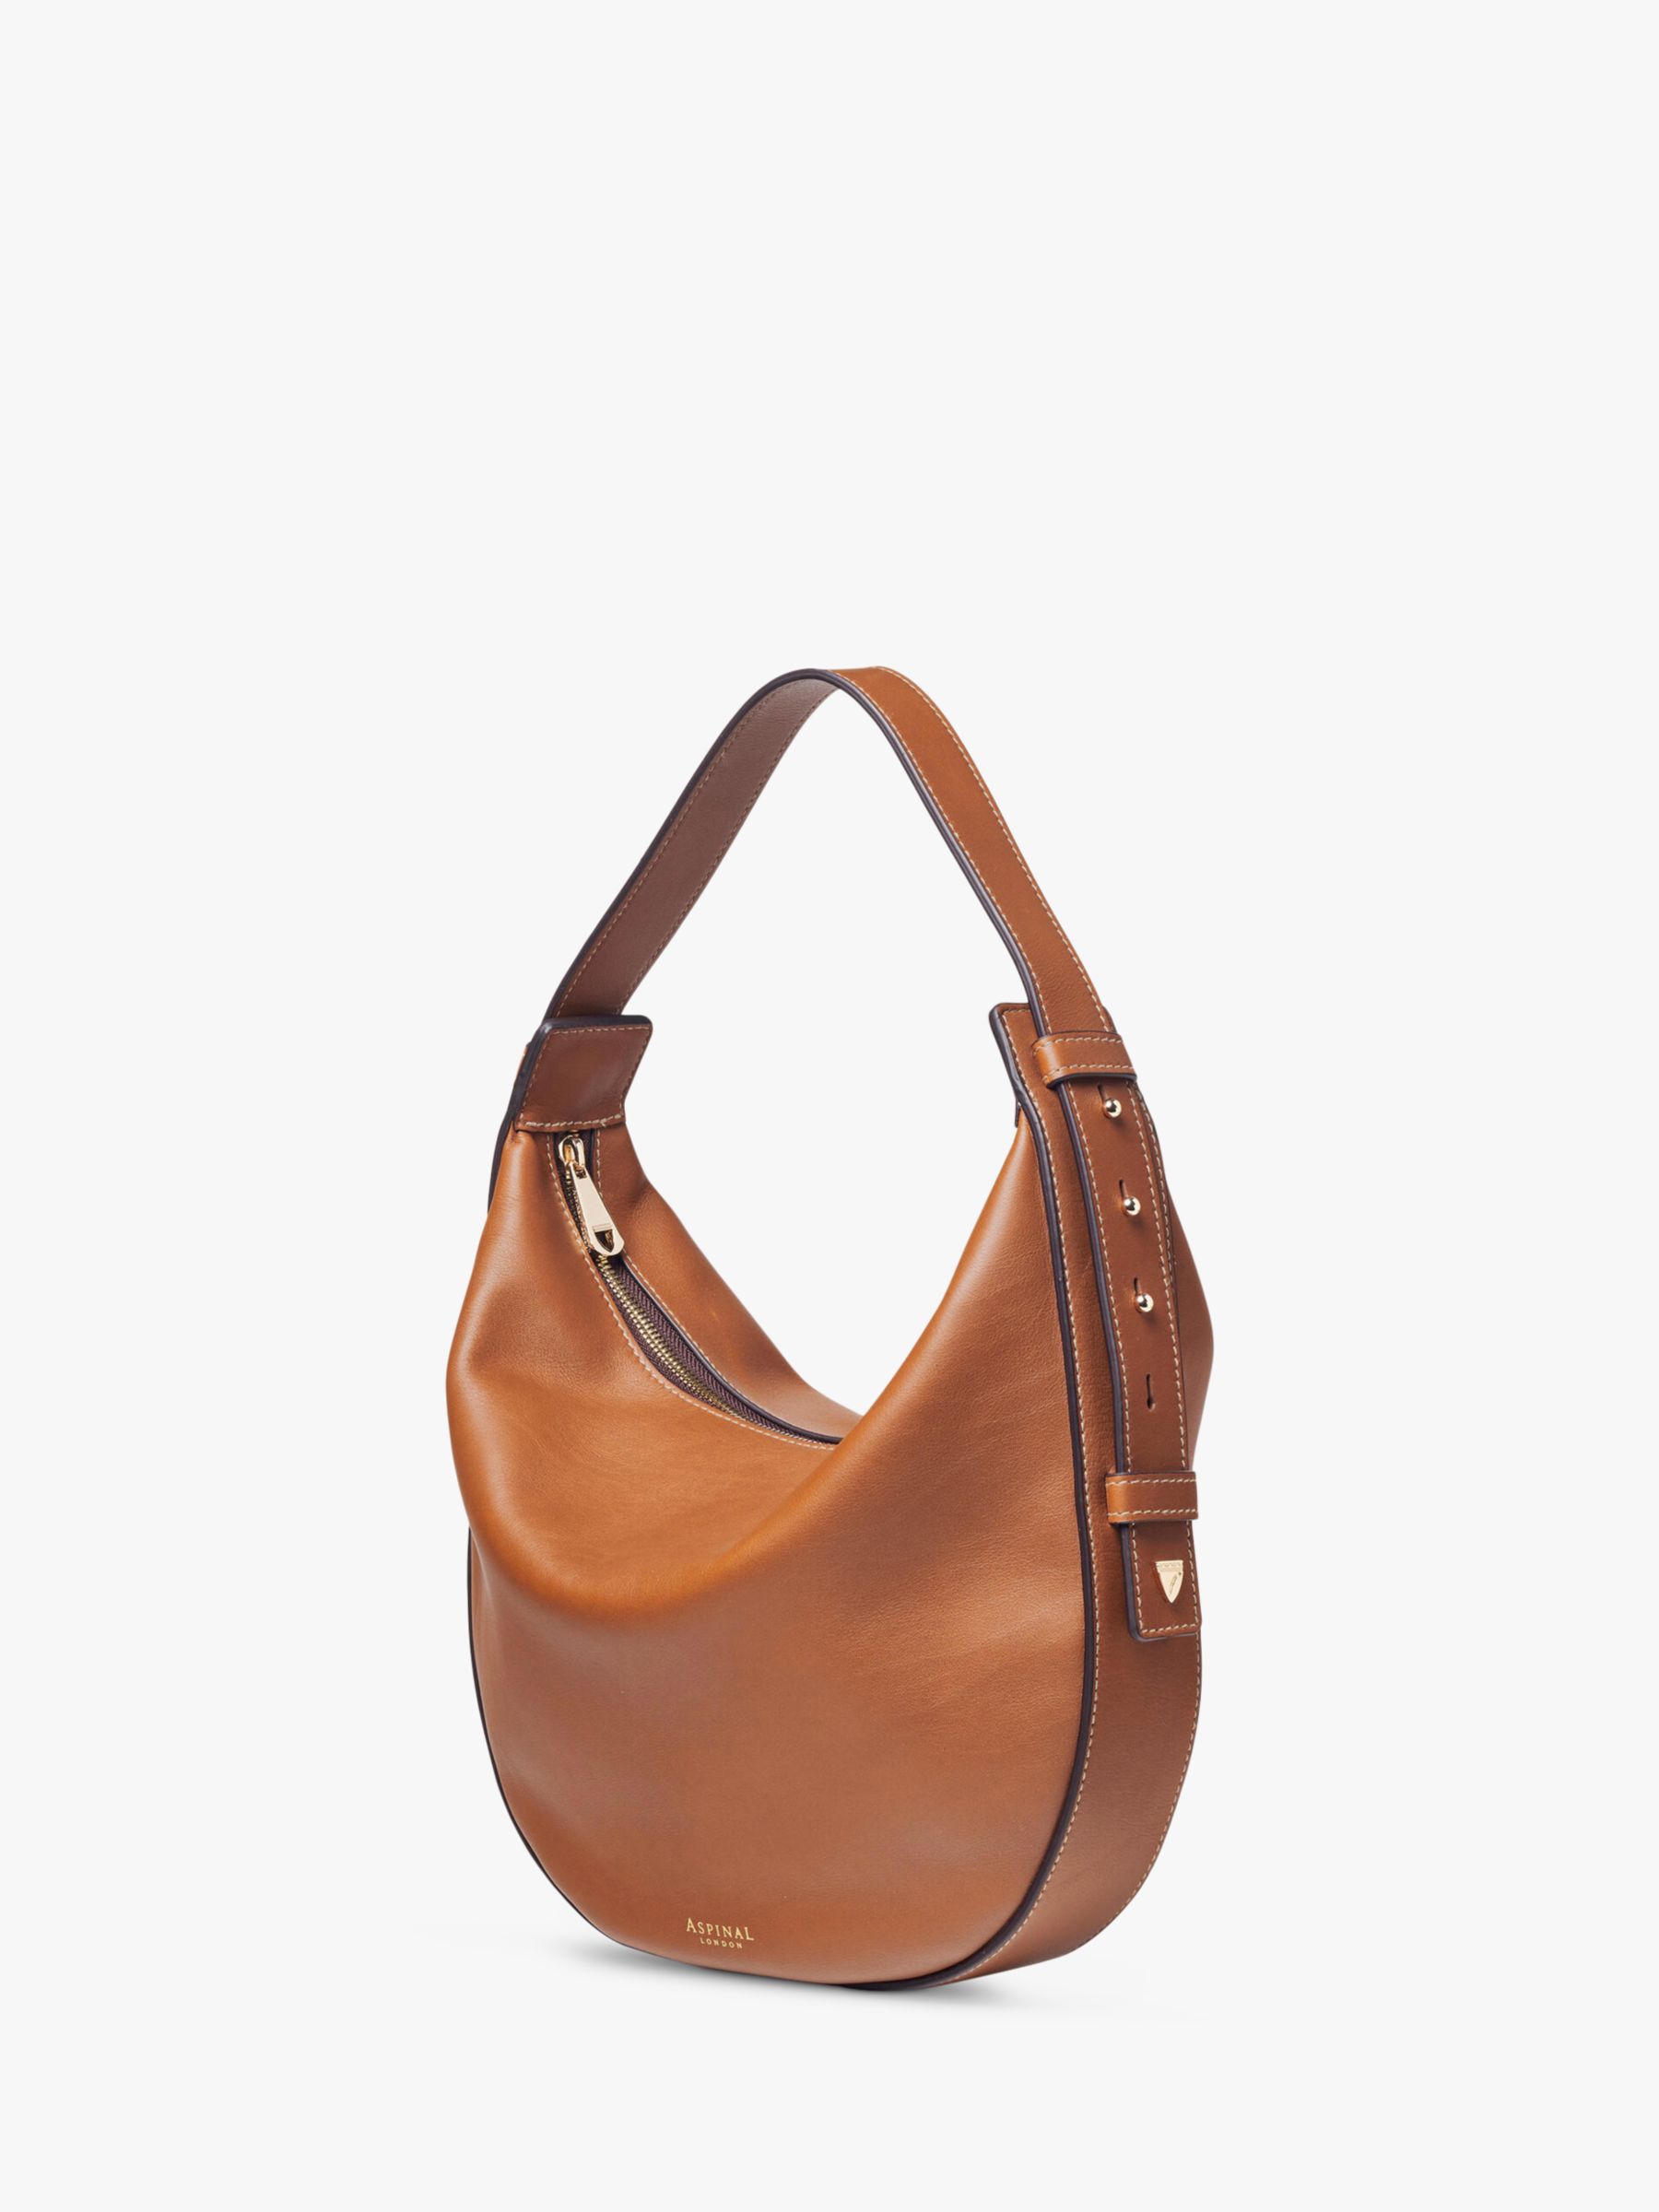 Aspinal of London Crescent Smooth Leather Hobo Bag, Tan